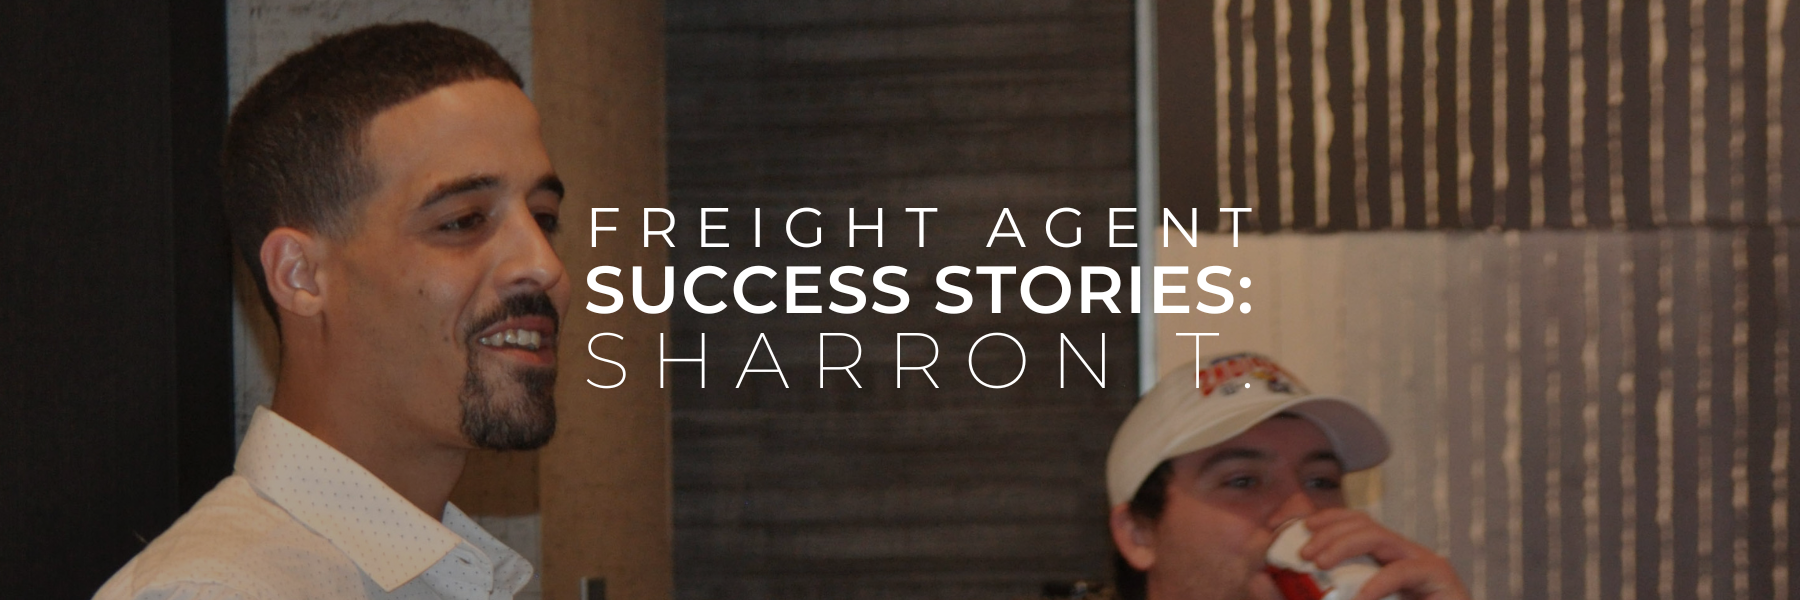 You are currently viewing Freight Agent Success Stories: Sharron T.